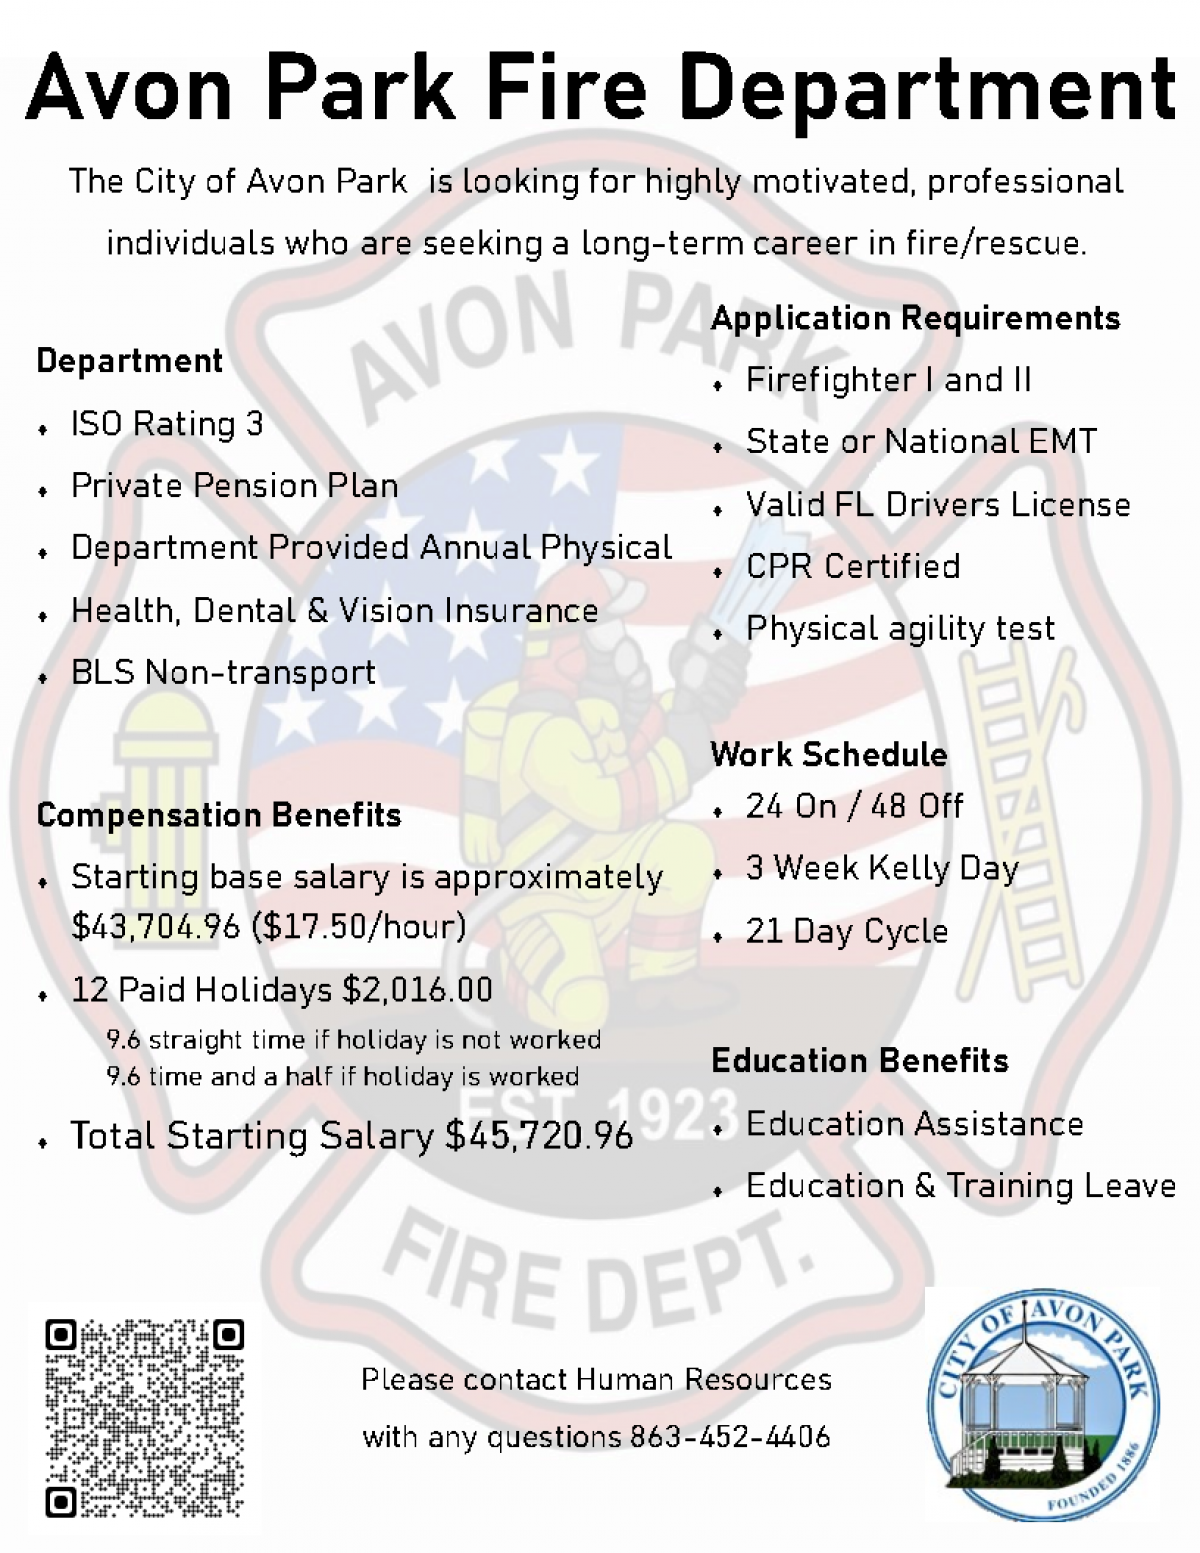 Image of Fire Department job perks